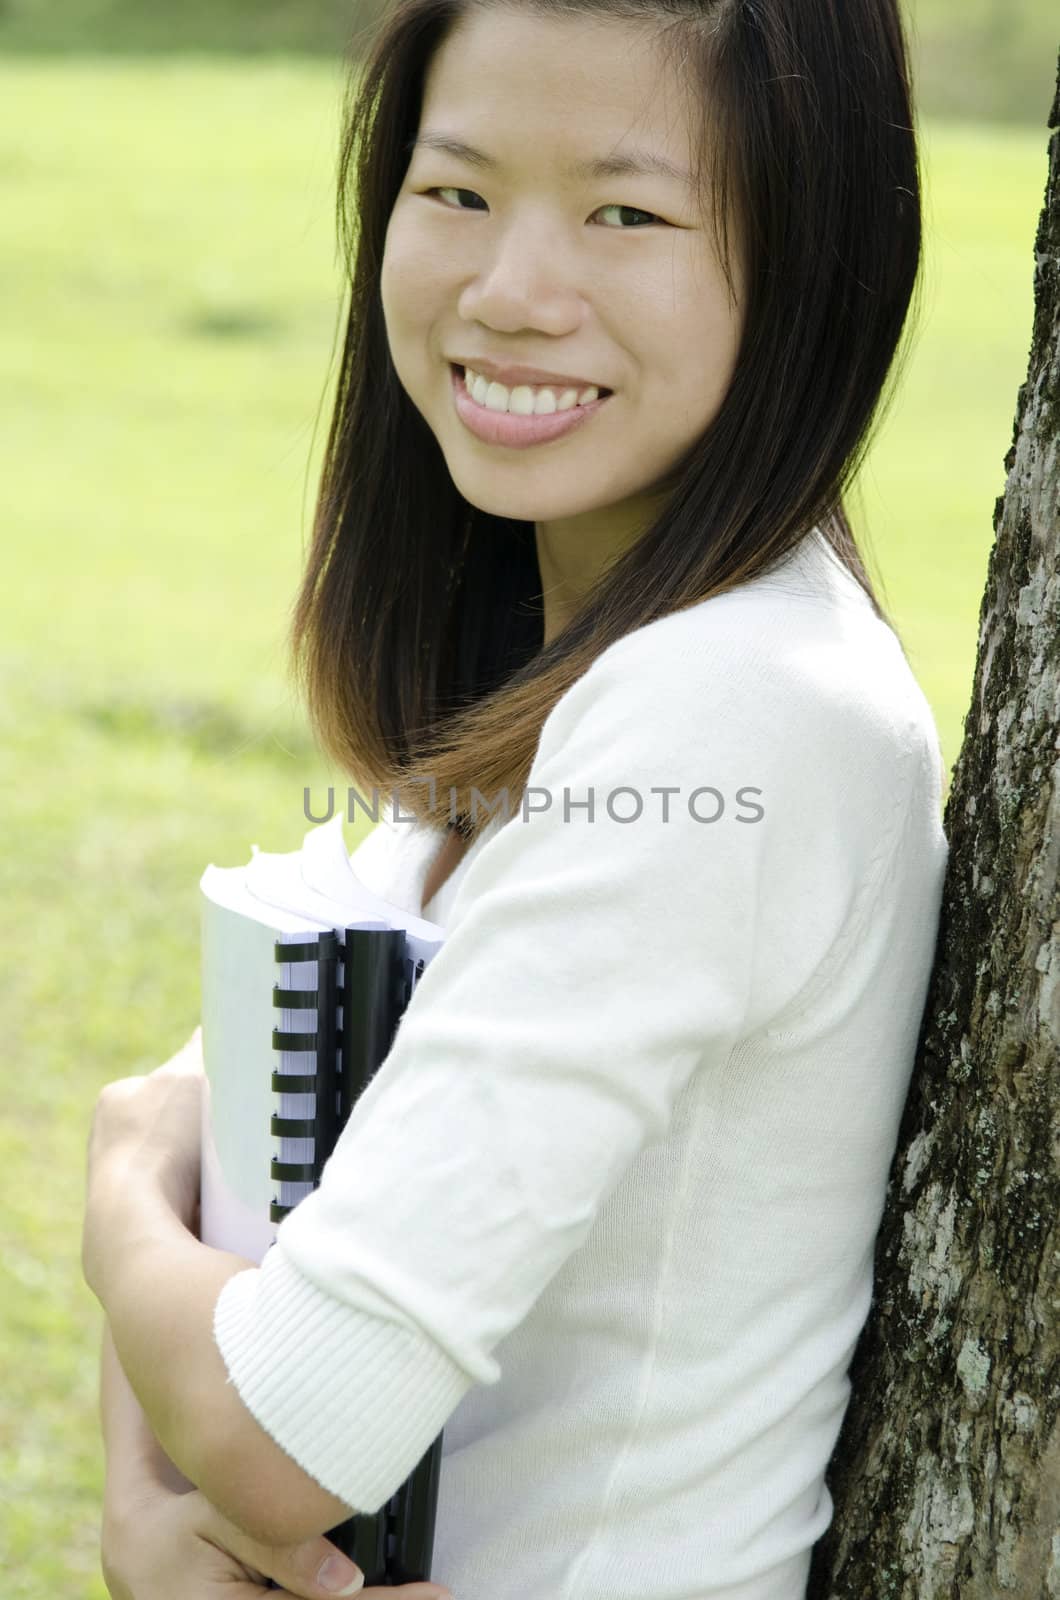 Asian college student smiling, outdoor.